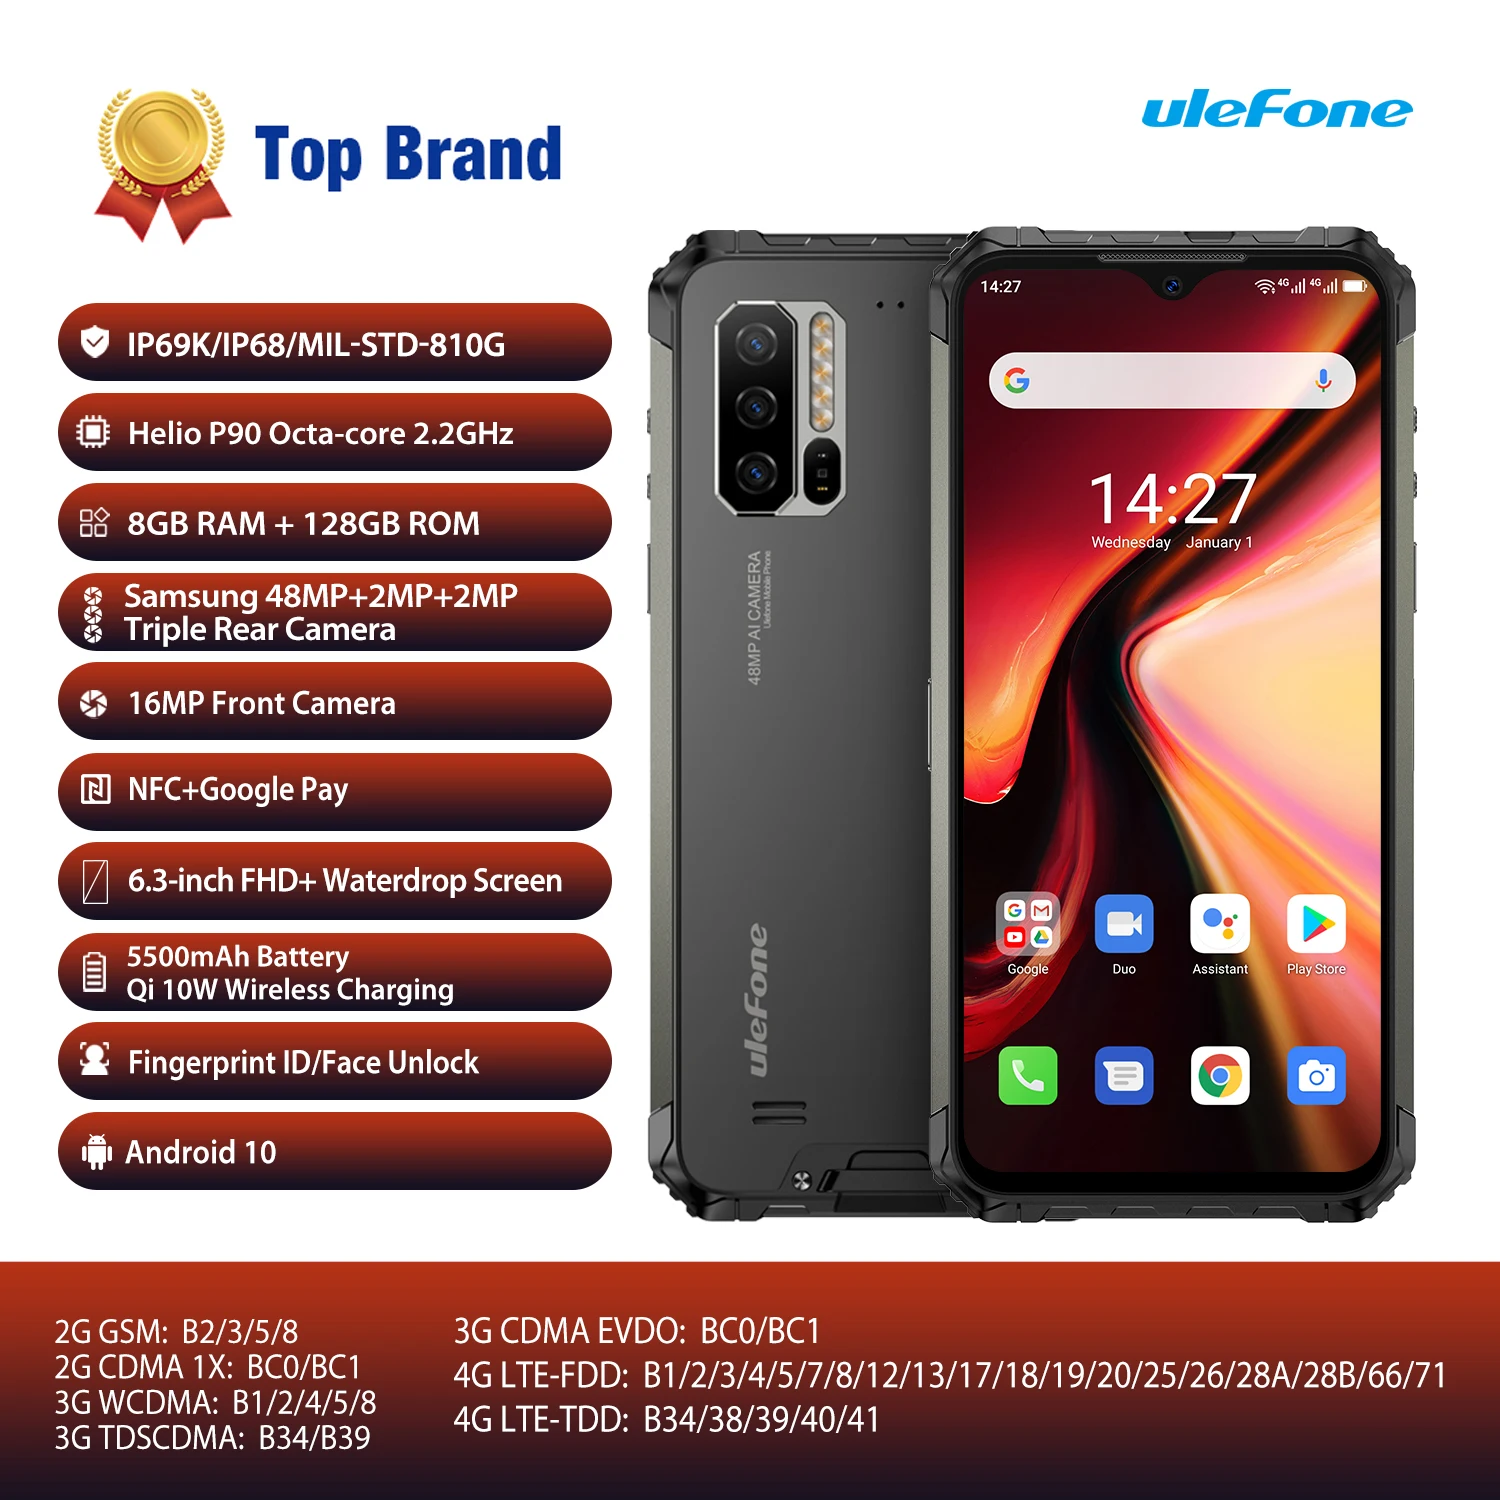 ulefone armor 7 rugged mobile phone android 10 2 4g5g wifi 8gb128gb helio p90 ip68 48mp cam 4g lte global version smartphone free global shipping